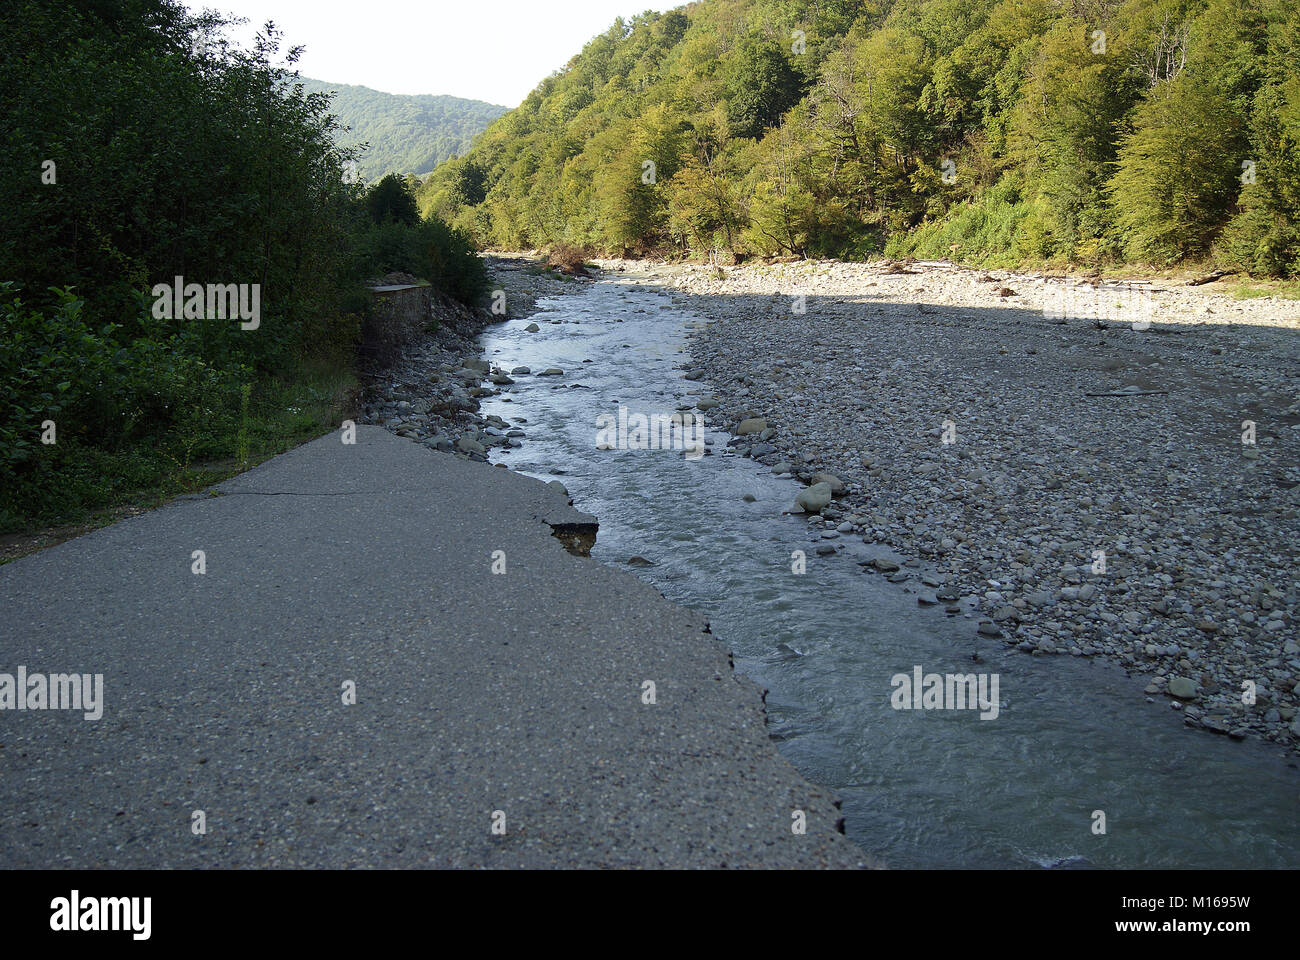 landscape overlooking the valley of a mountain river; in the foreground - an asphalt, suddenly ending in the breakage, with a torn edge: a section of  Stock Photo